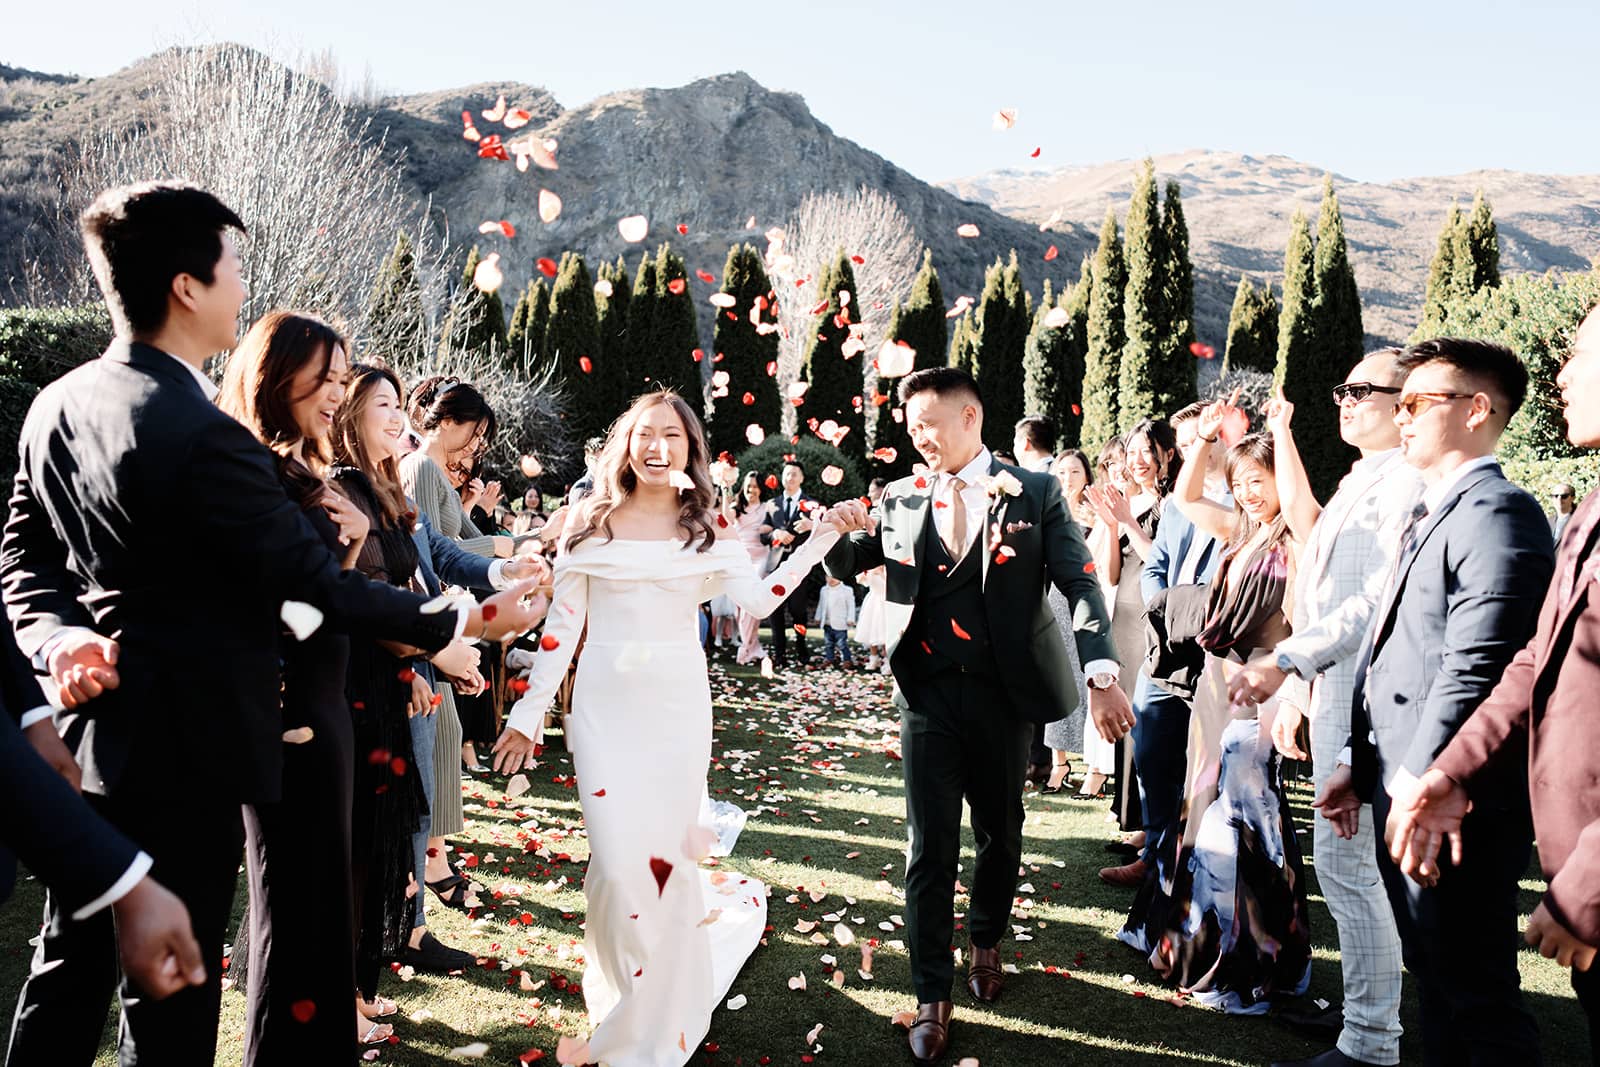 Queenstown New Zealand Elopement Wedding Photographer - Tom and Lindy have an intimate elopement wedding as they joyfully walk down the aisle with confetti thrown at them.